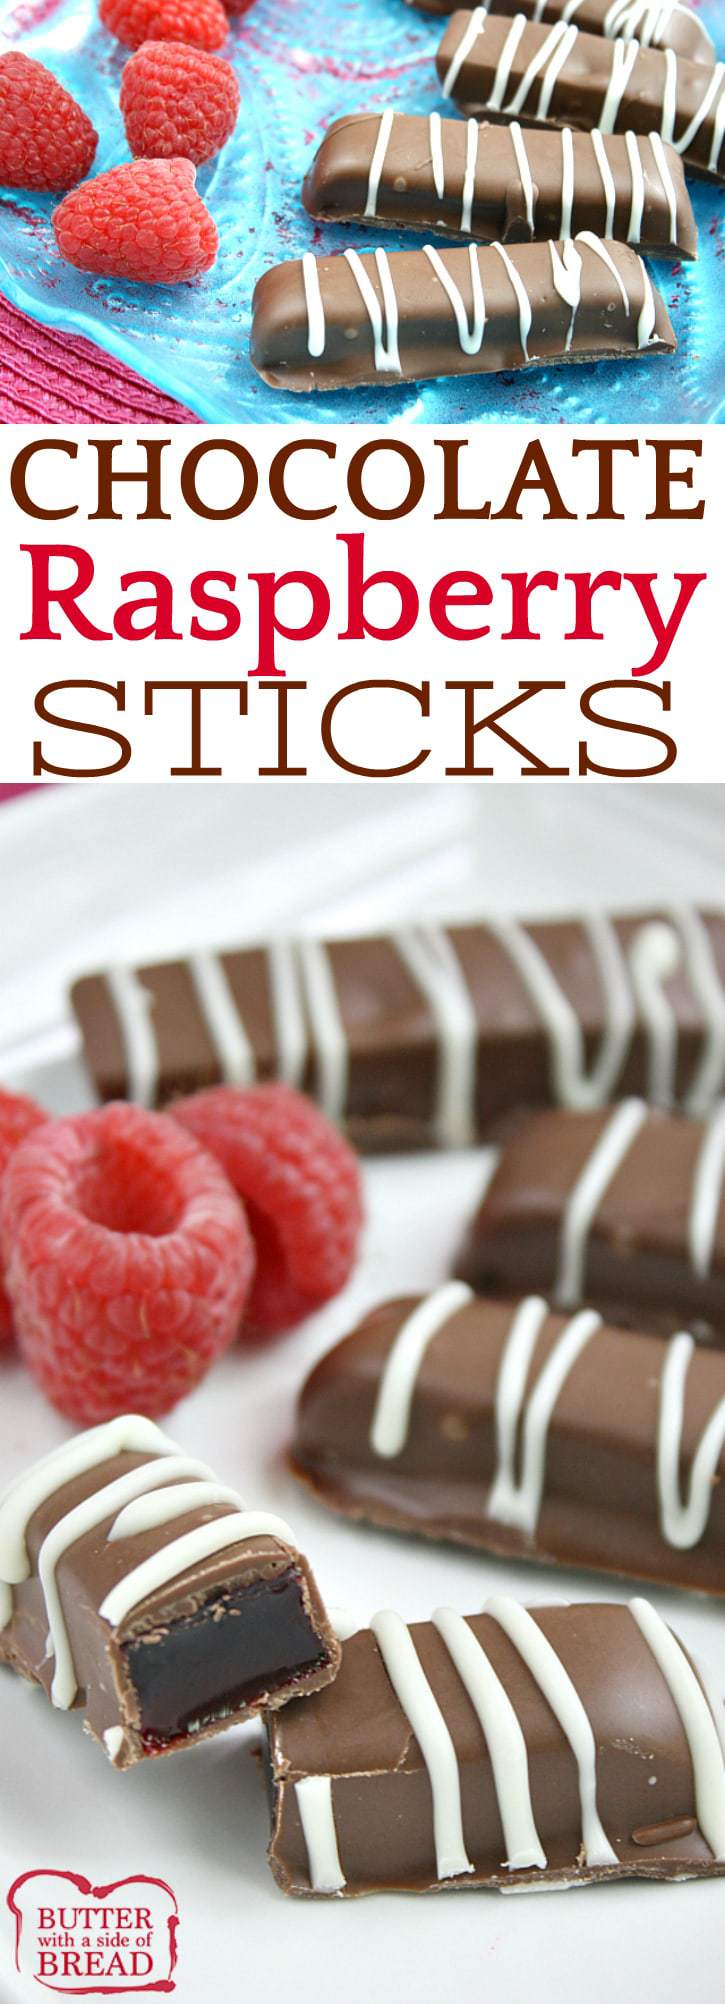 Chocolate Raspberry Sticks are made with a delicious jellied raspberry filling dipped in melted chocolate – a favorite holiday candy!